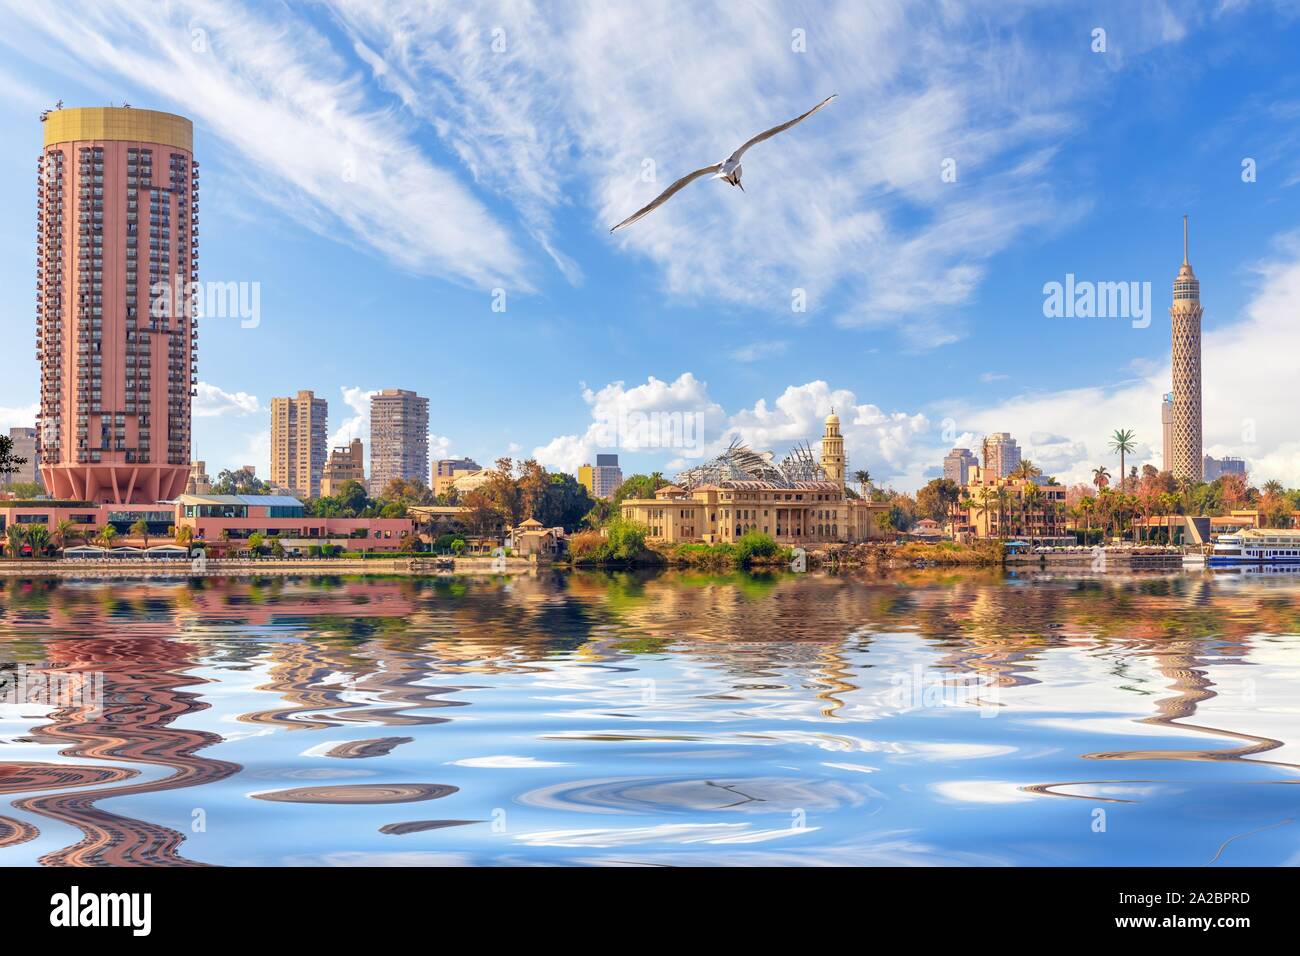 The Nile and famous sky-scrappers of Cairo, Egypt. Stock Photo